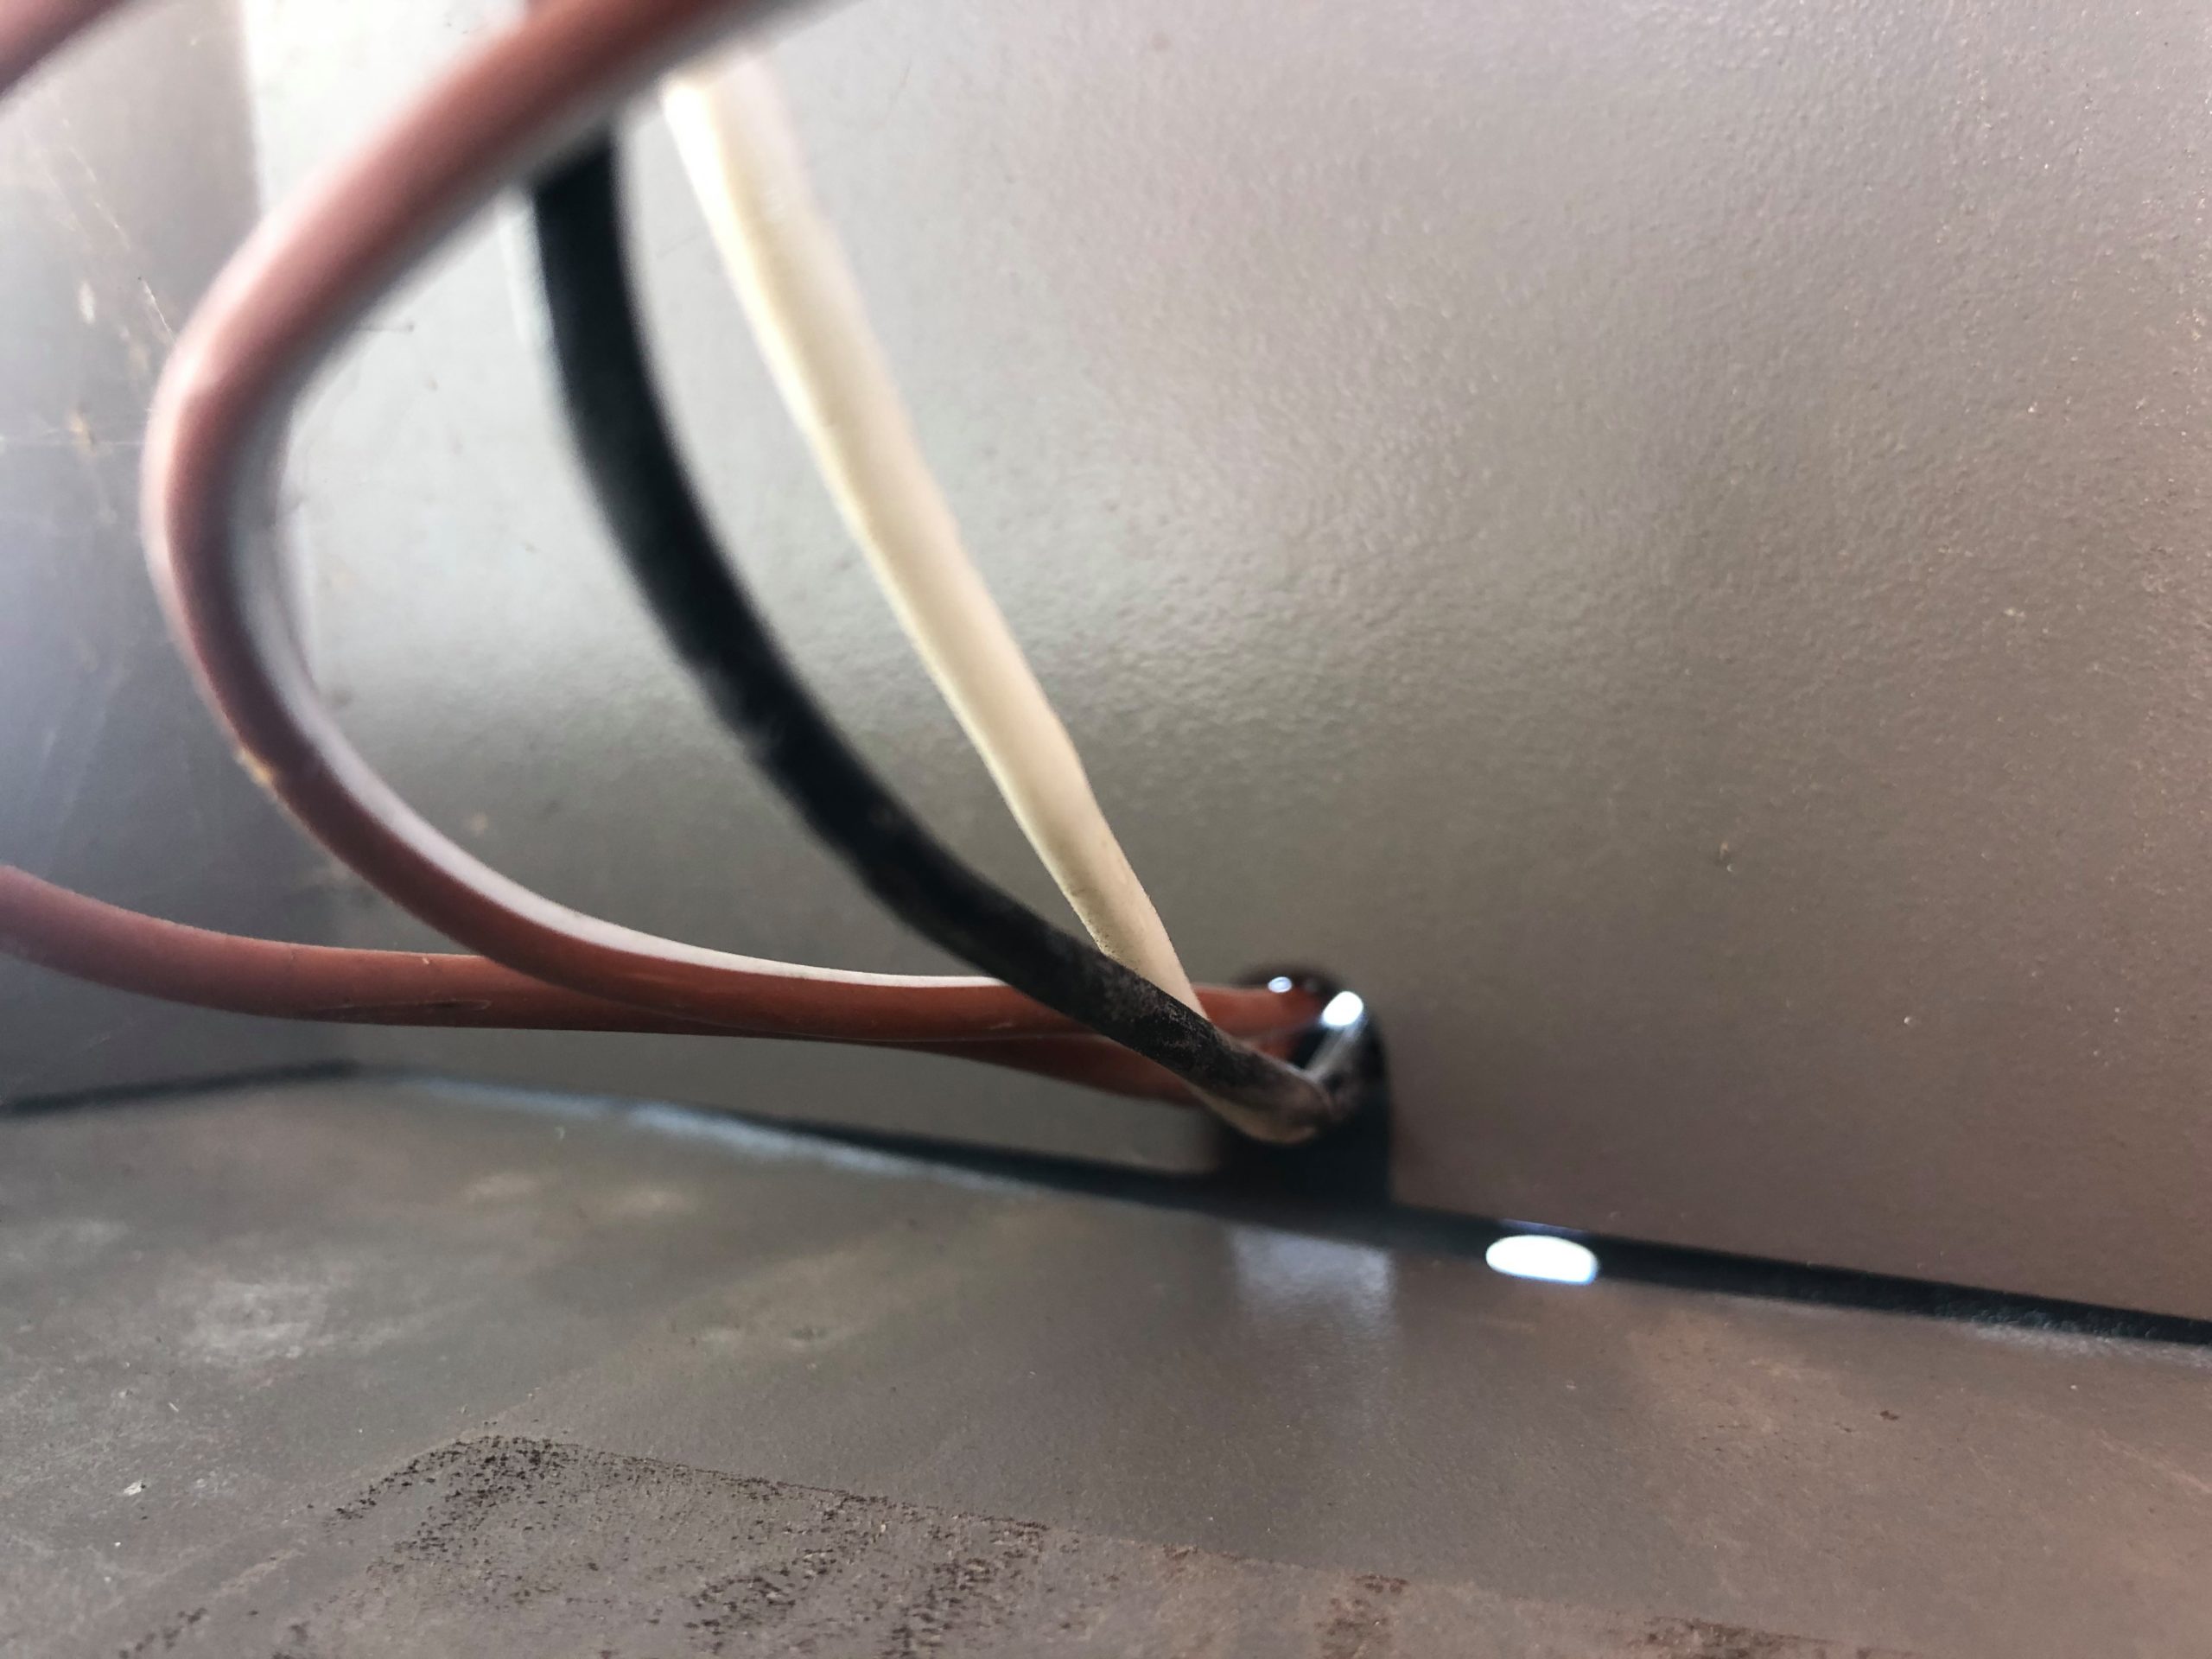 The correct way to place the wired in an appliance repair.